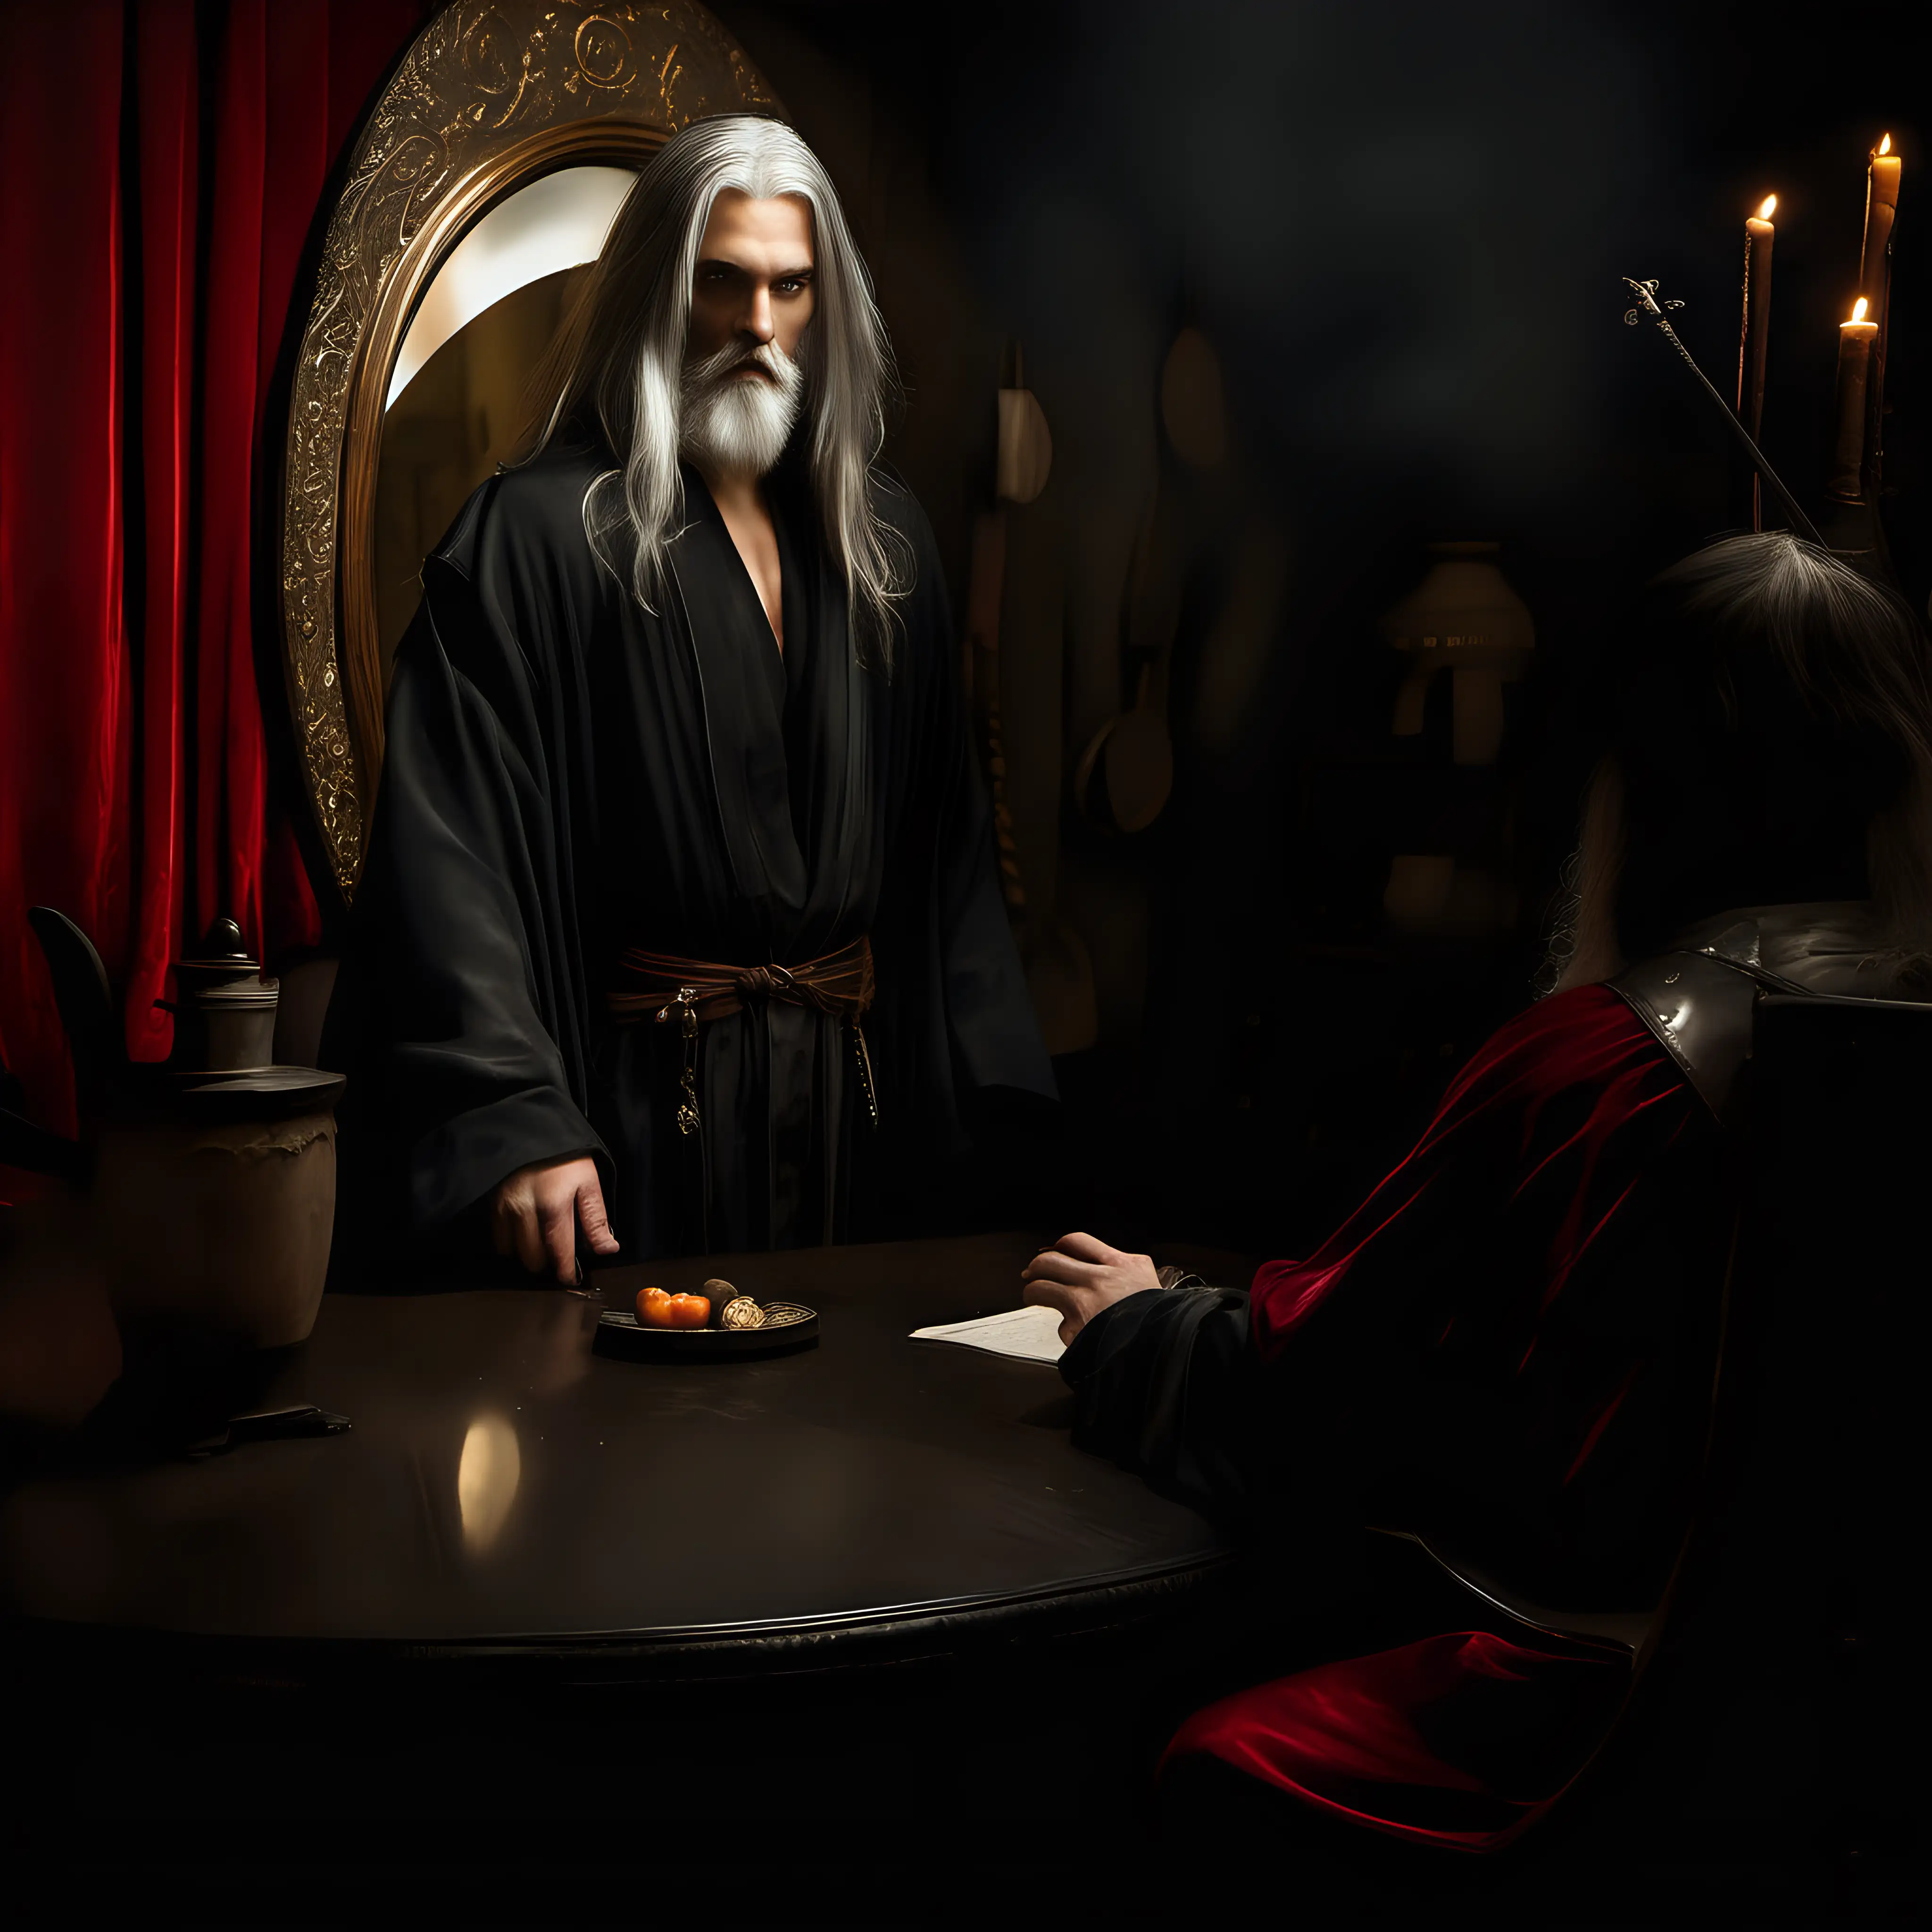 can see the sorcerers  back, he is facing away, he is sitting at  the table, he is dressed in a black robe , he has long silver hair & a beard, he is magical, there is a round mirror on the table